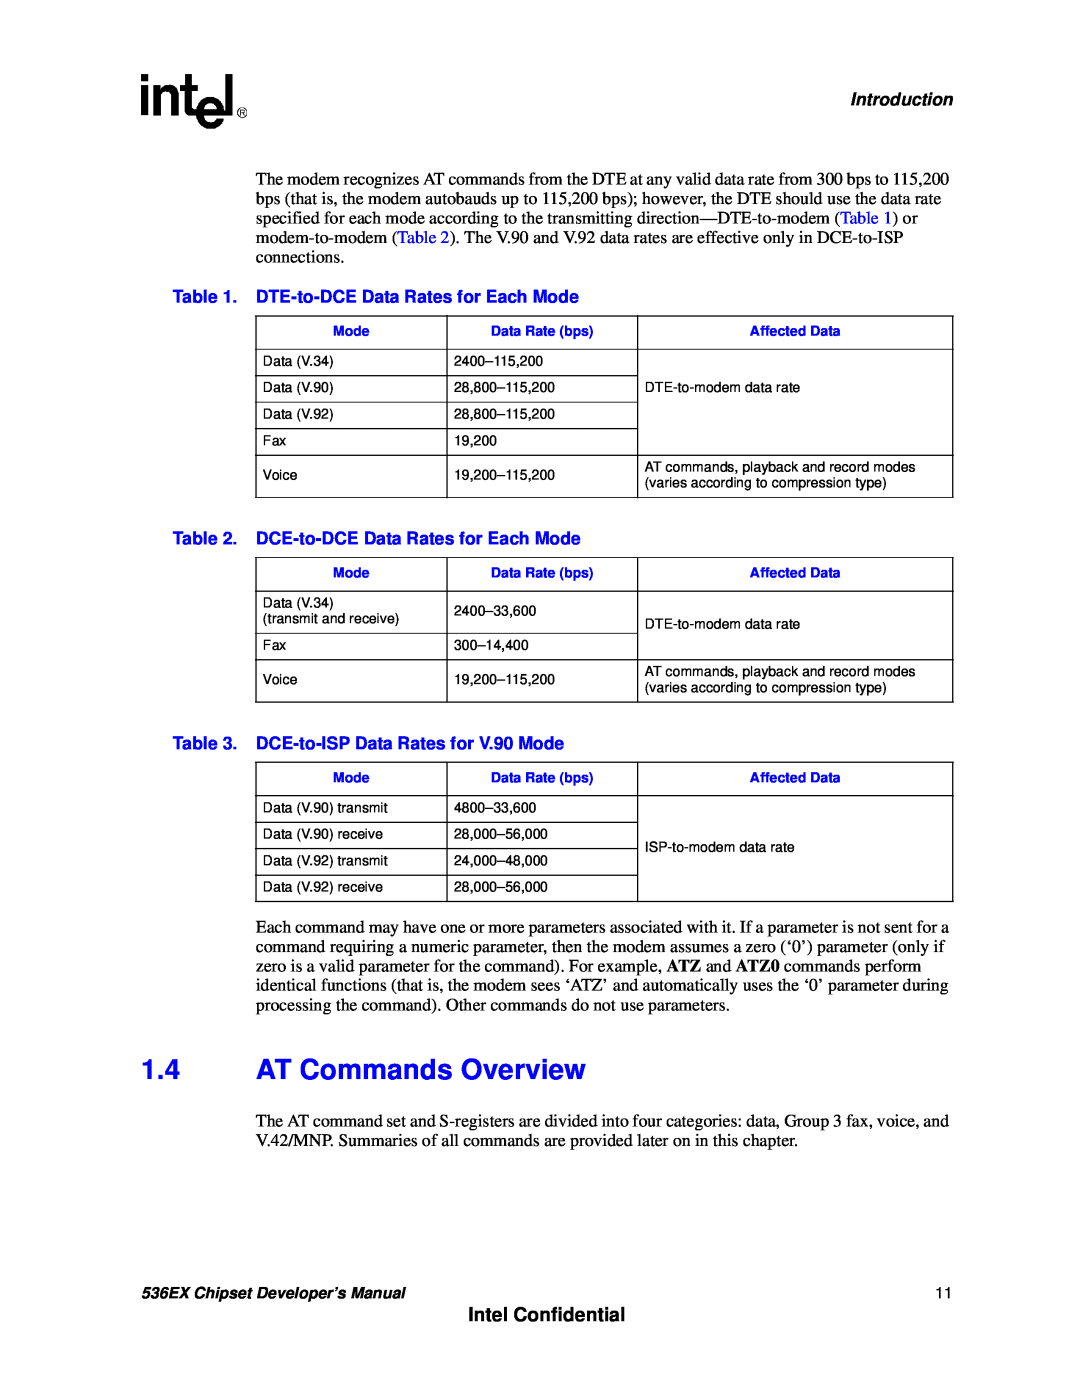 Intel 536EX manual Intel Confidential, Introduction, DTE-to-DCEData Rates for Each Mode, DCE-to-DCEData Rates for Each Mode 